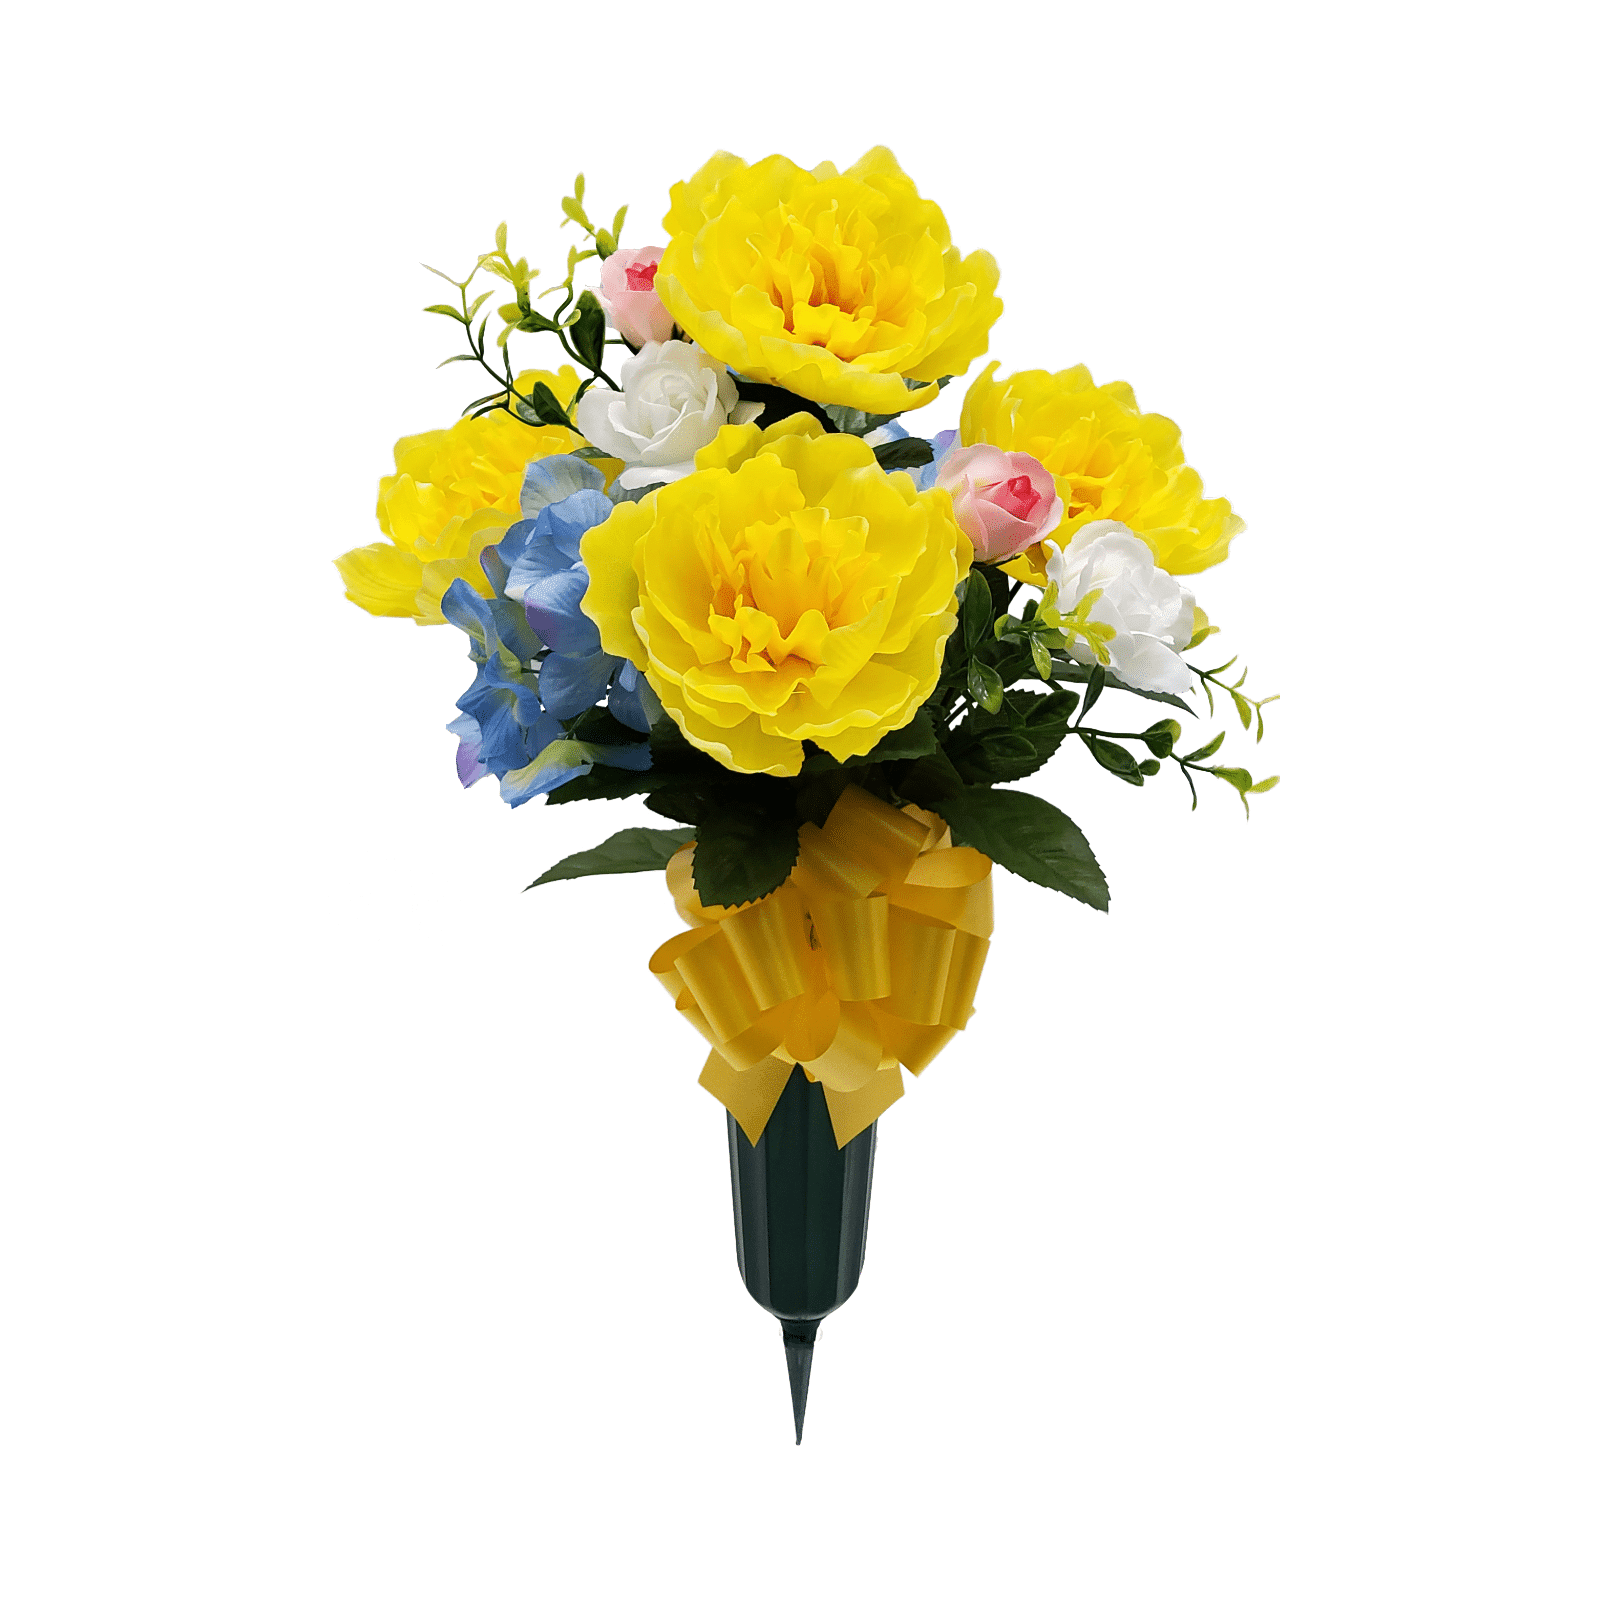 Mainstays 20 Artificial Flower, Peony and Hydrangea, Cemetery Vase, Yellow and Blue Color.